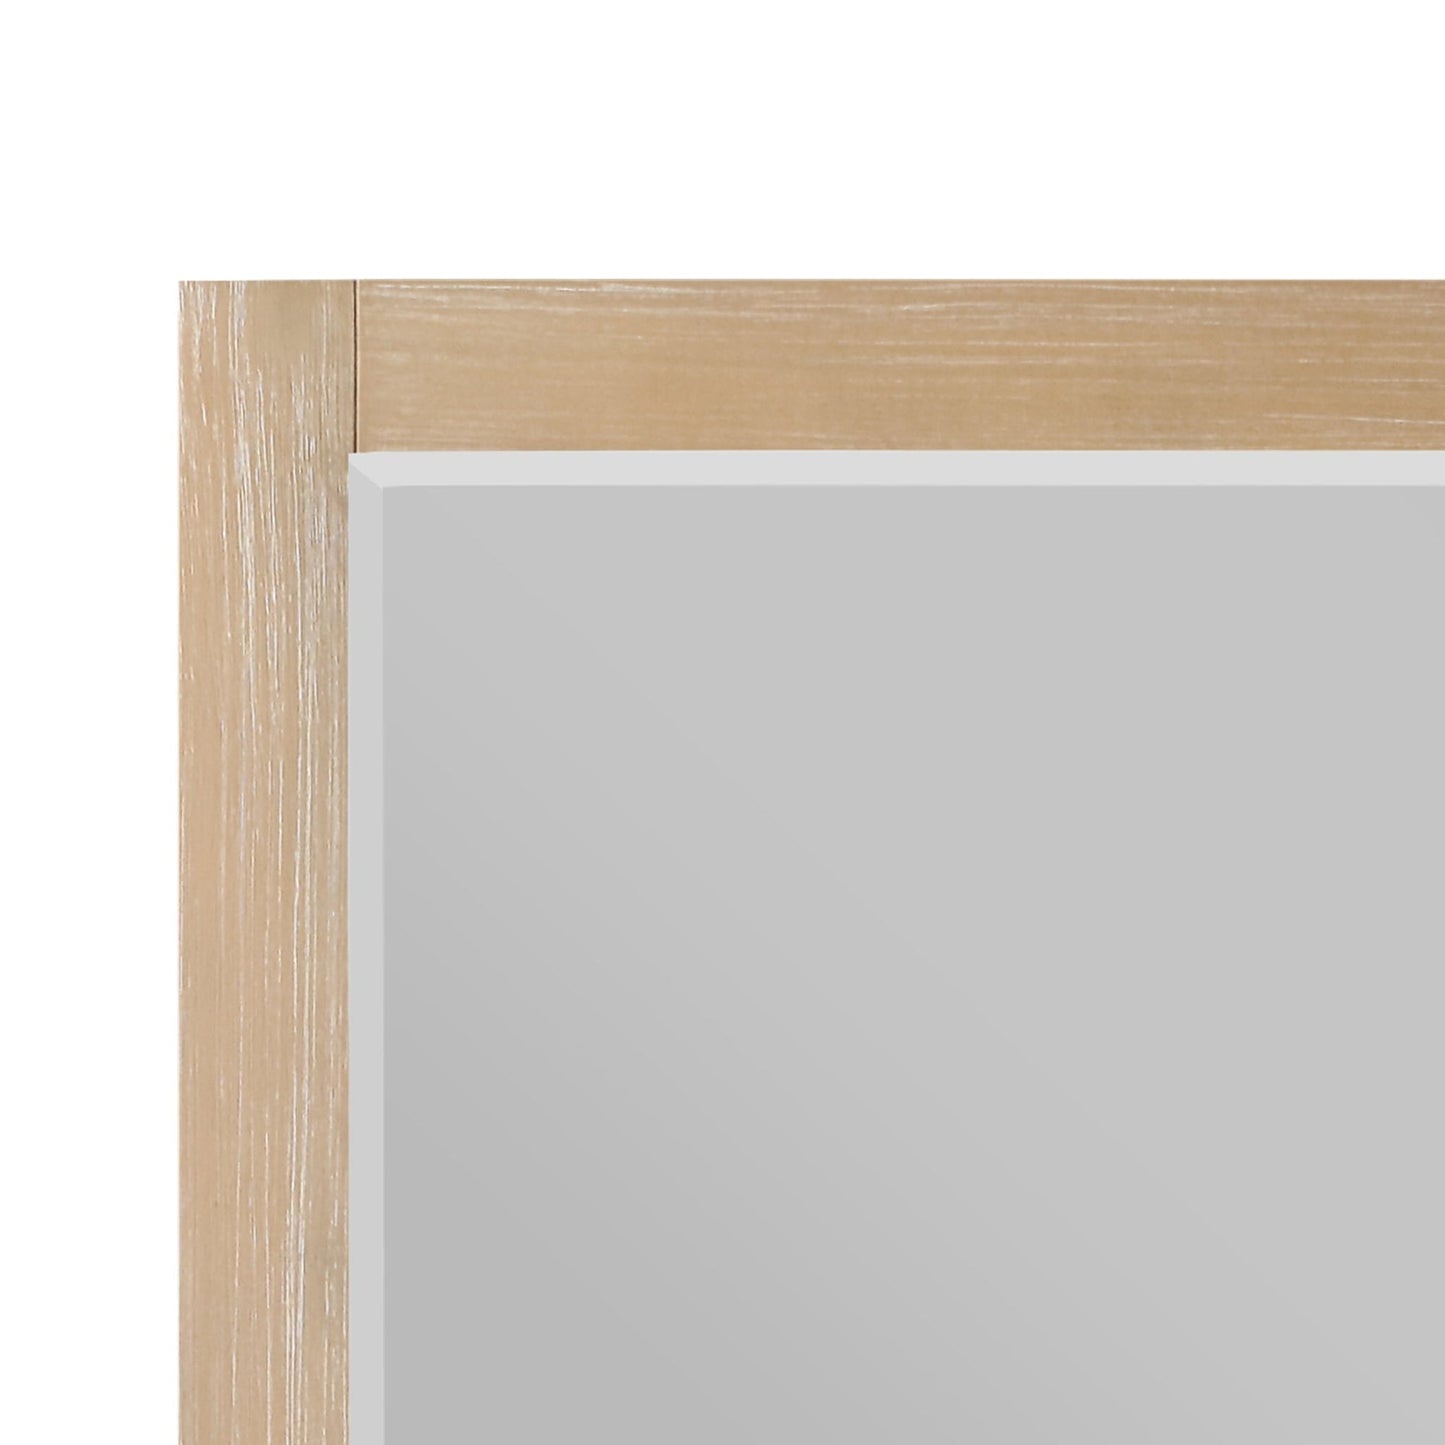 Altair Ivy 48" x 36" Rectangle Weathered Pine Wood Framed Wall-Mounted Mirror